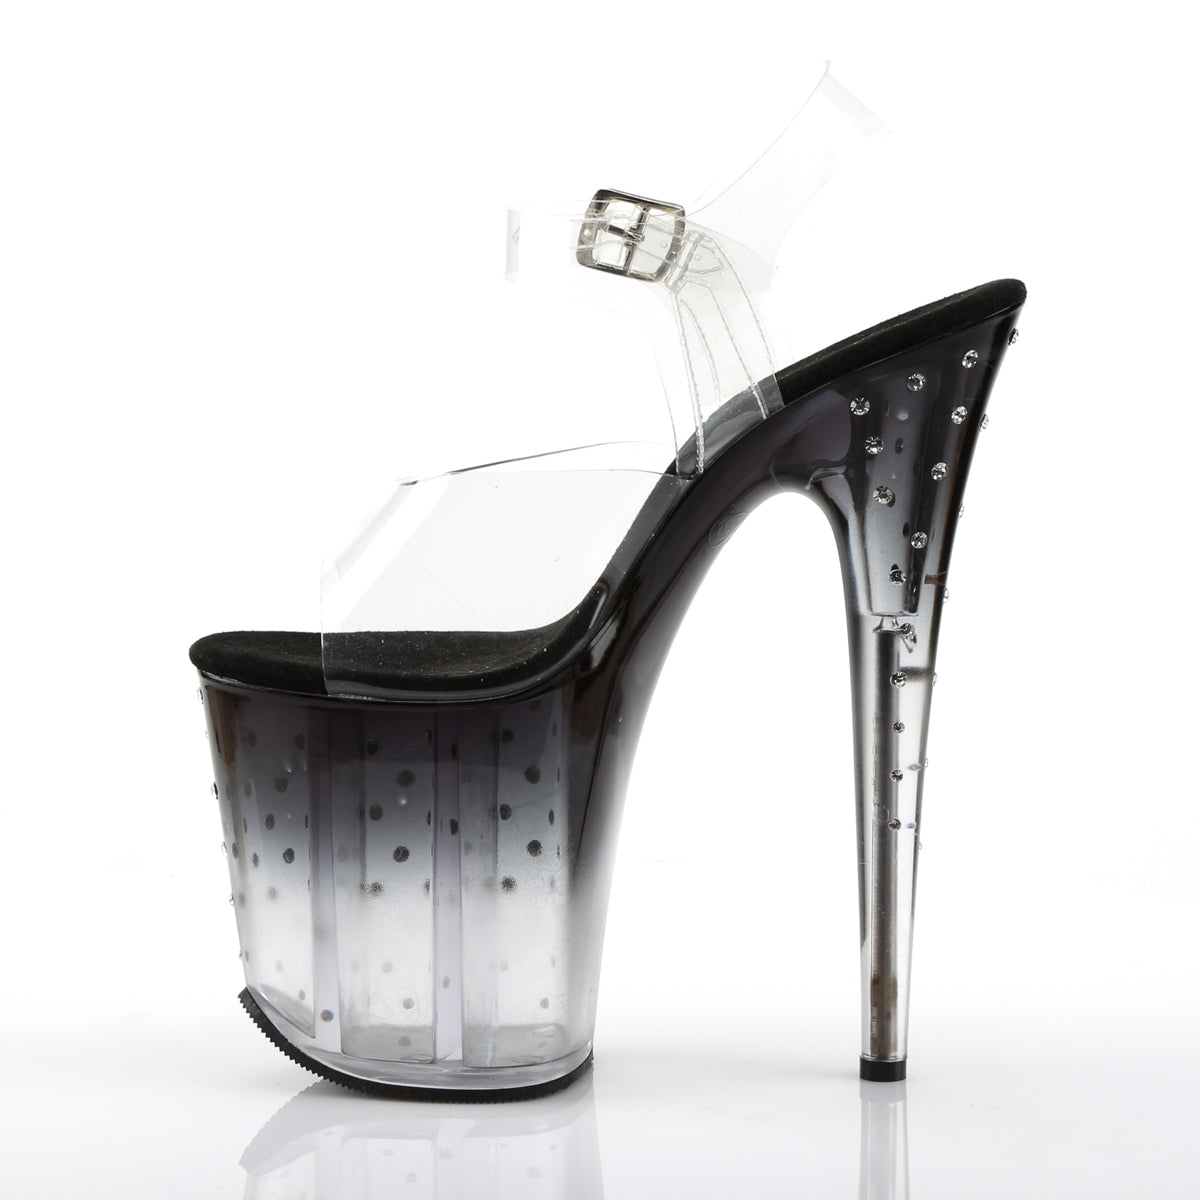 STARDUST-808T 8" Heel Clear and Black Pole Dancing Platforms-Pleaser- Sexy Shoes Pole Dance Heels